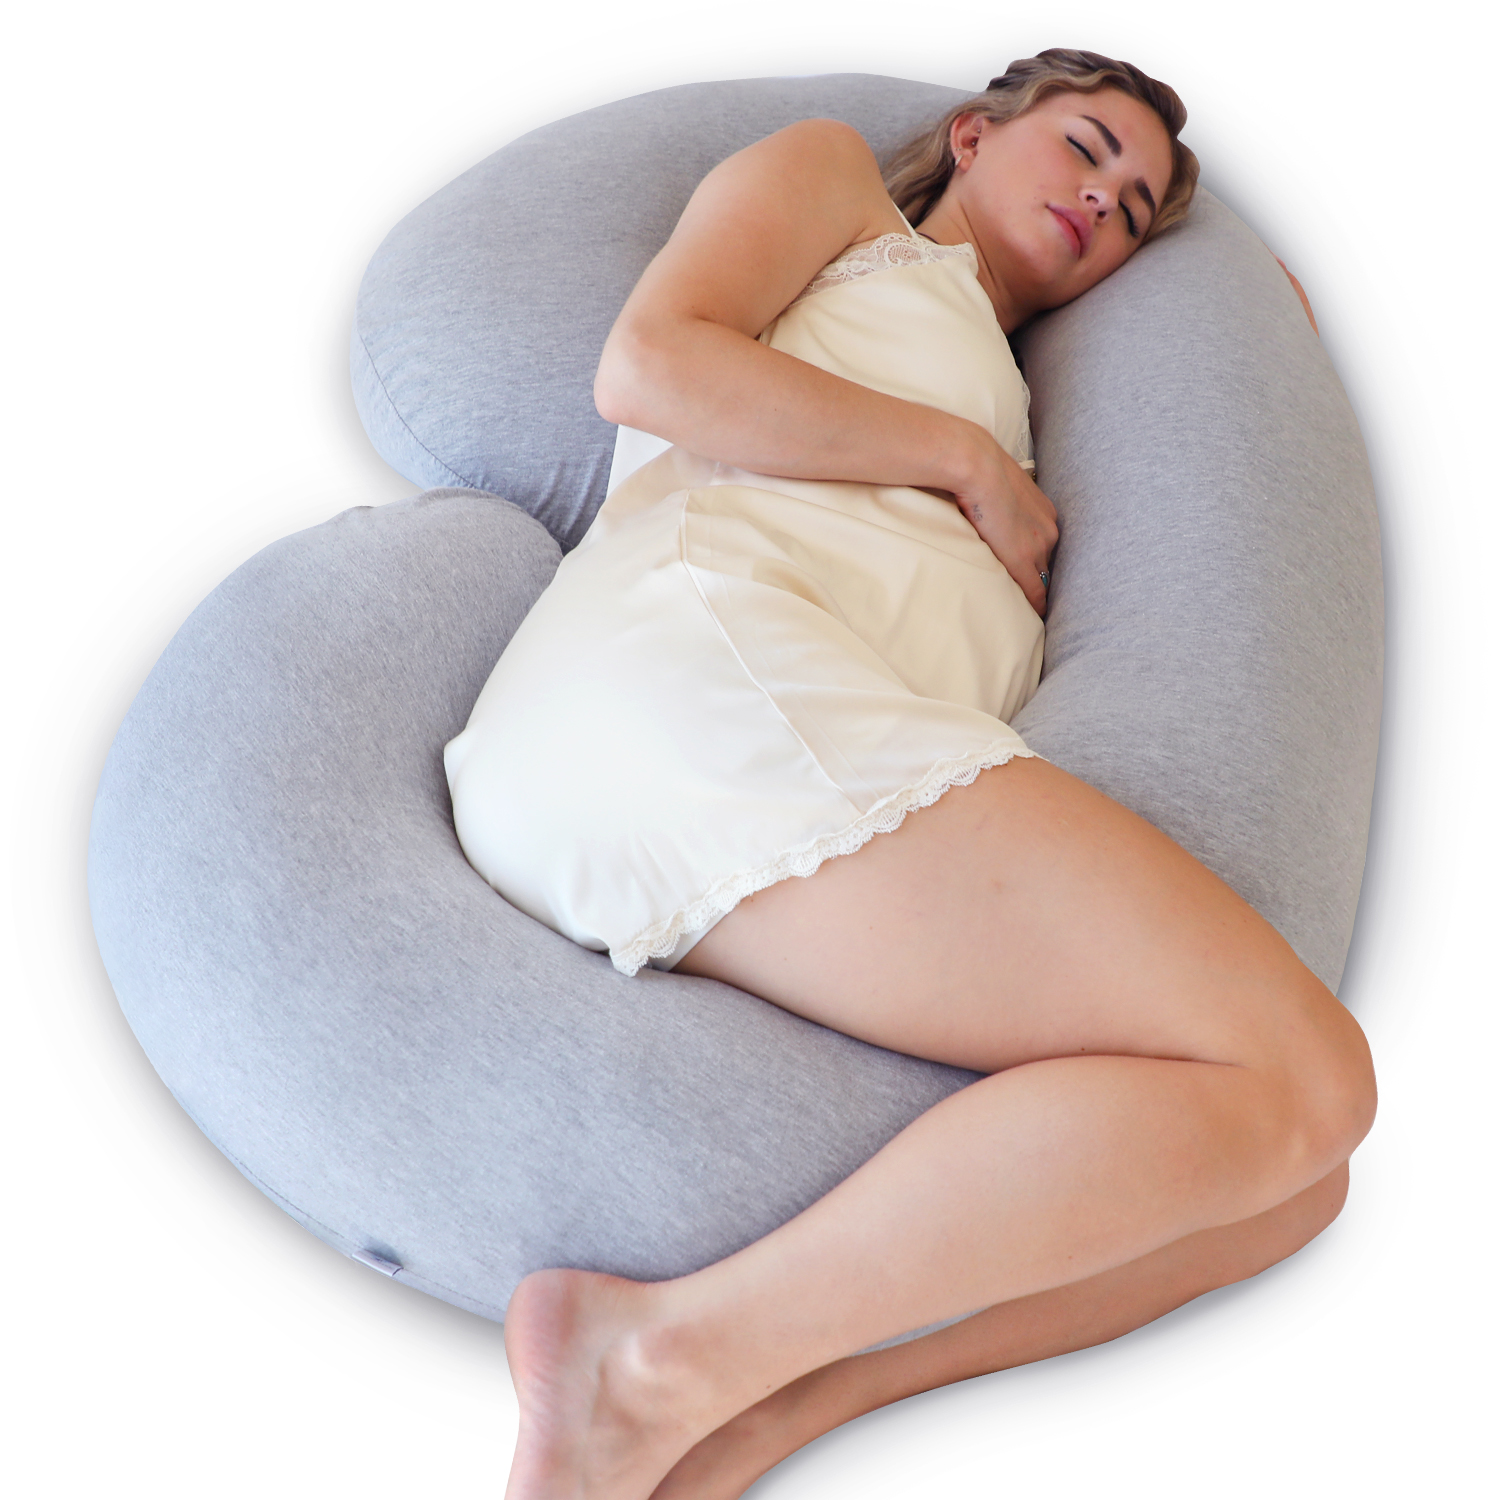 PharMeDoc Pregnancy Pillow - C-Shaped Body Pillow for Pregnant Women - Jersey Cover, Gray - image 1 of 8